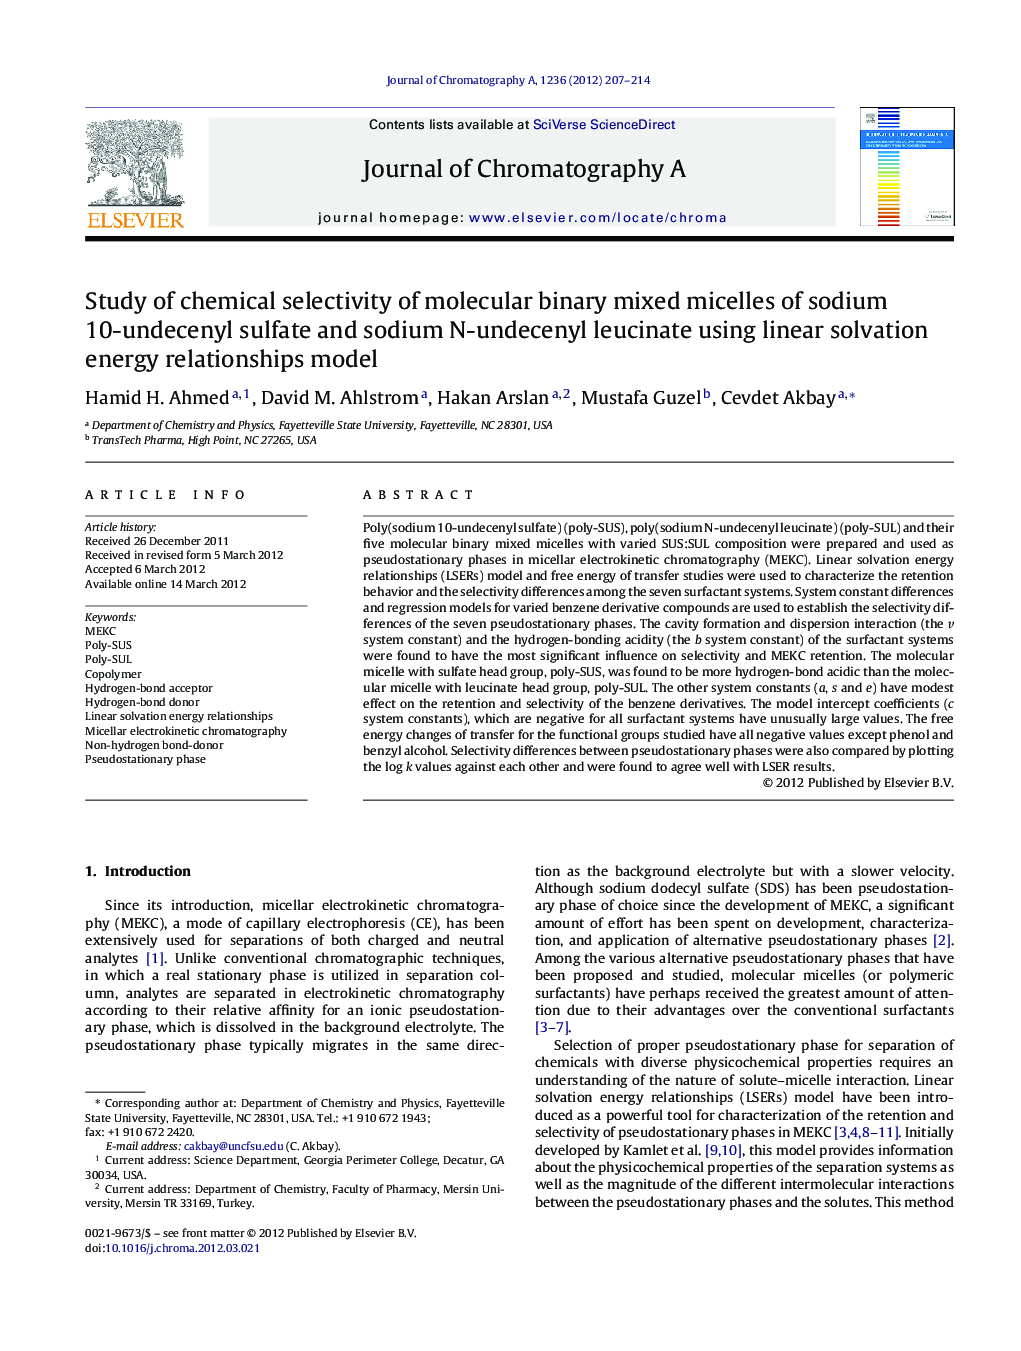 Study of chemical selectivity of molecular binary mixed micelles of sodium 10-undecenyl sulfate and sodium N-undecenyl leucinate using linear solvation energy relationships model